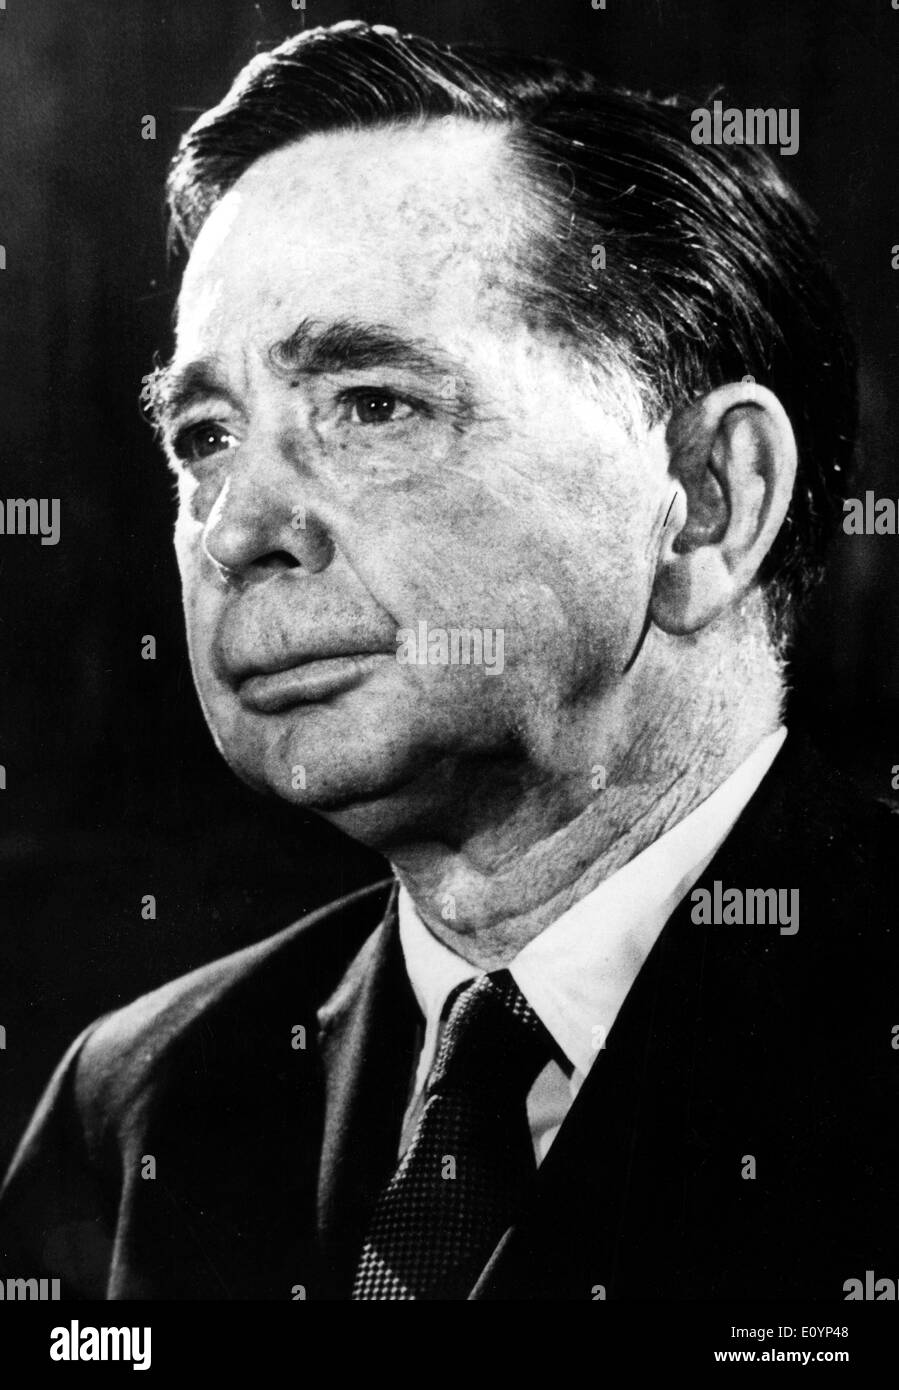 Jan 02, 1971; Washington D.C., USA; Recent portrait of the new speaker of the House of Representatives of the American Congress, Mr. CARL ALBERT. Stock Photo